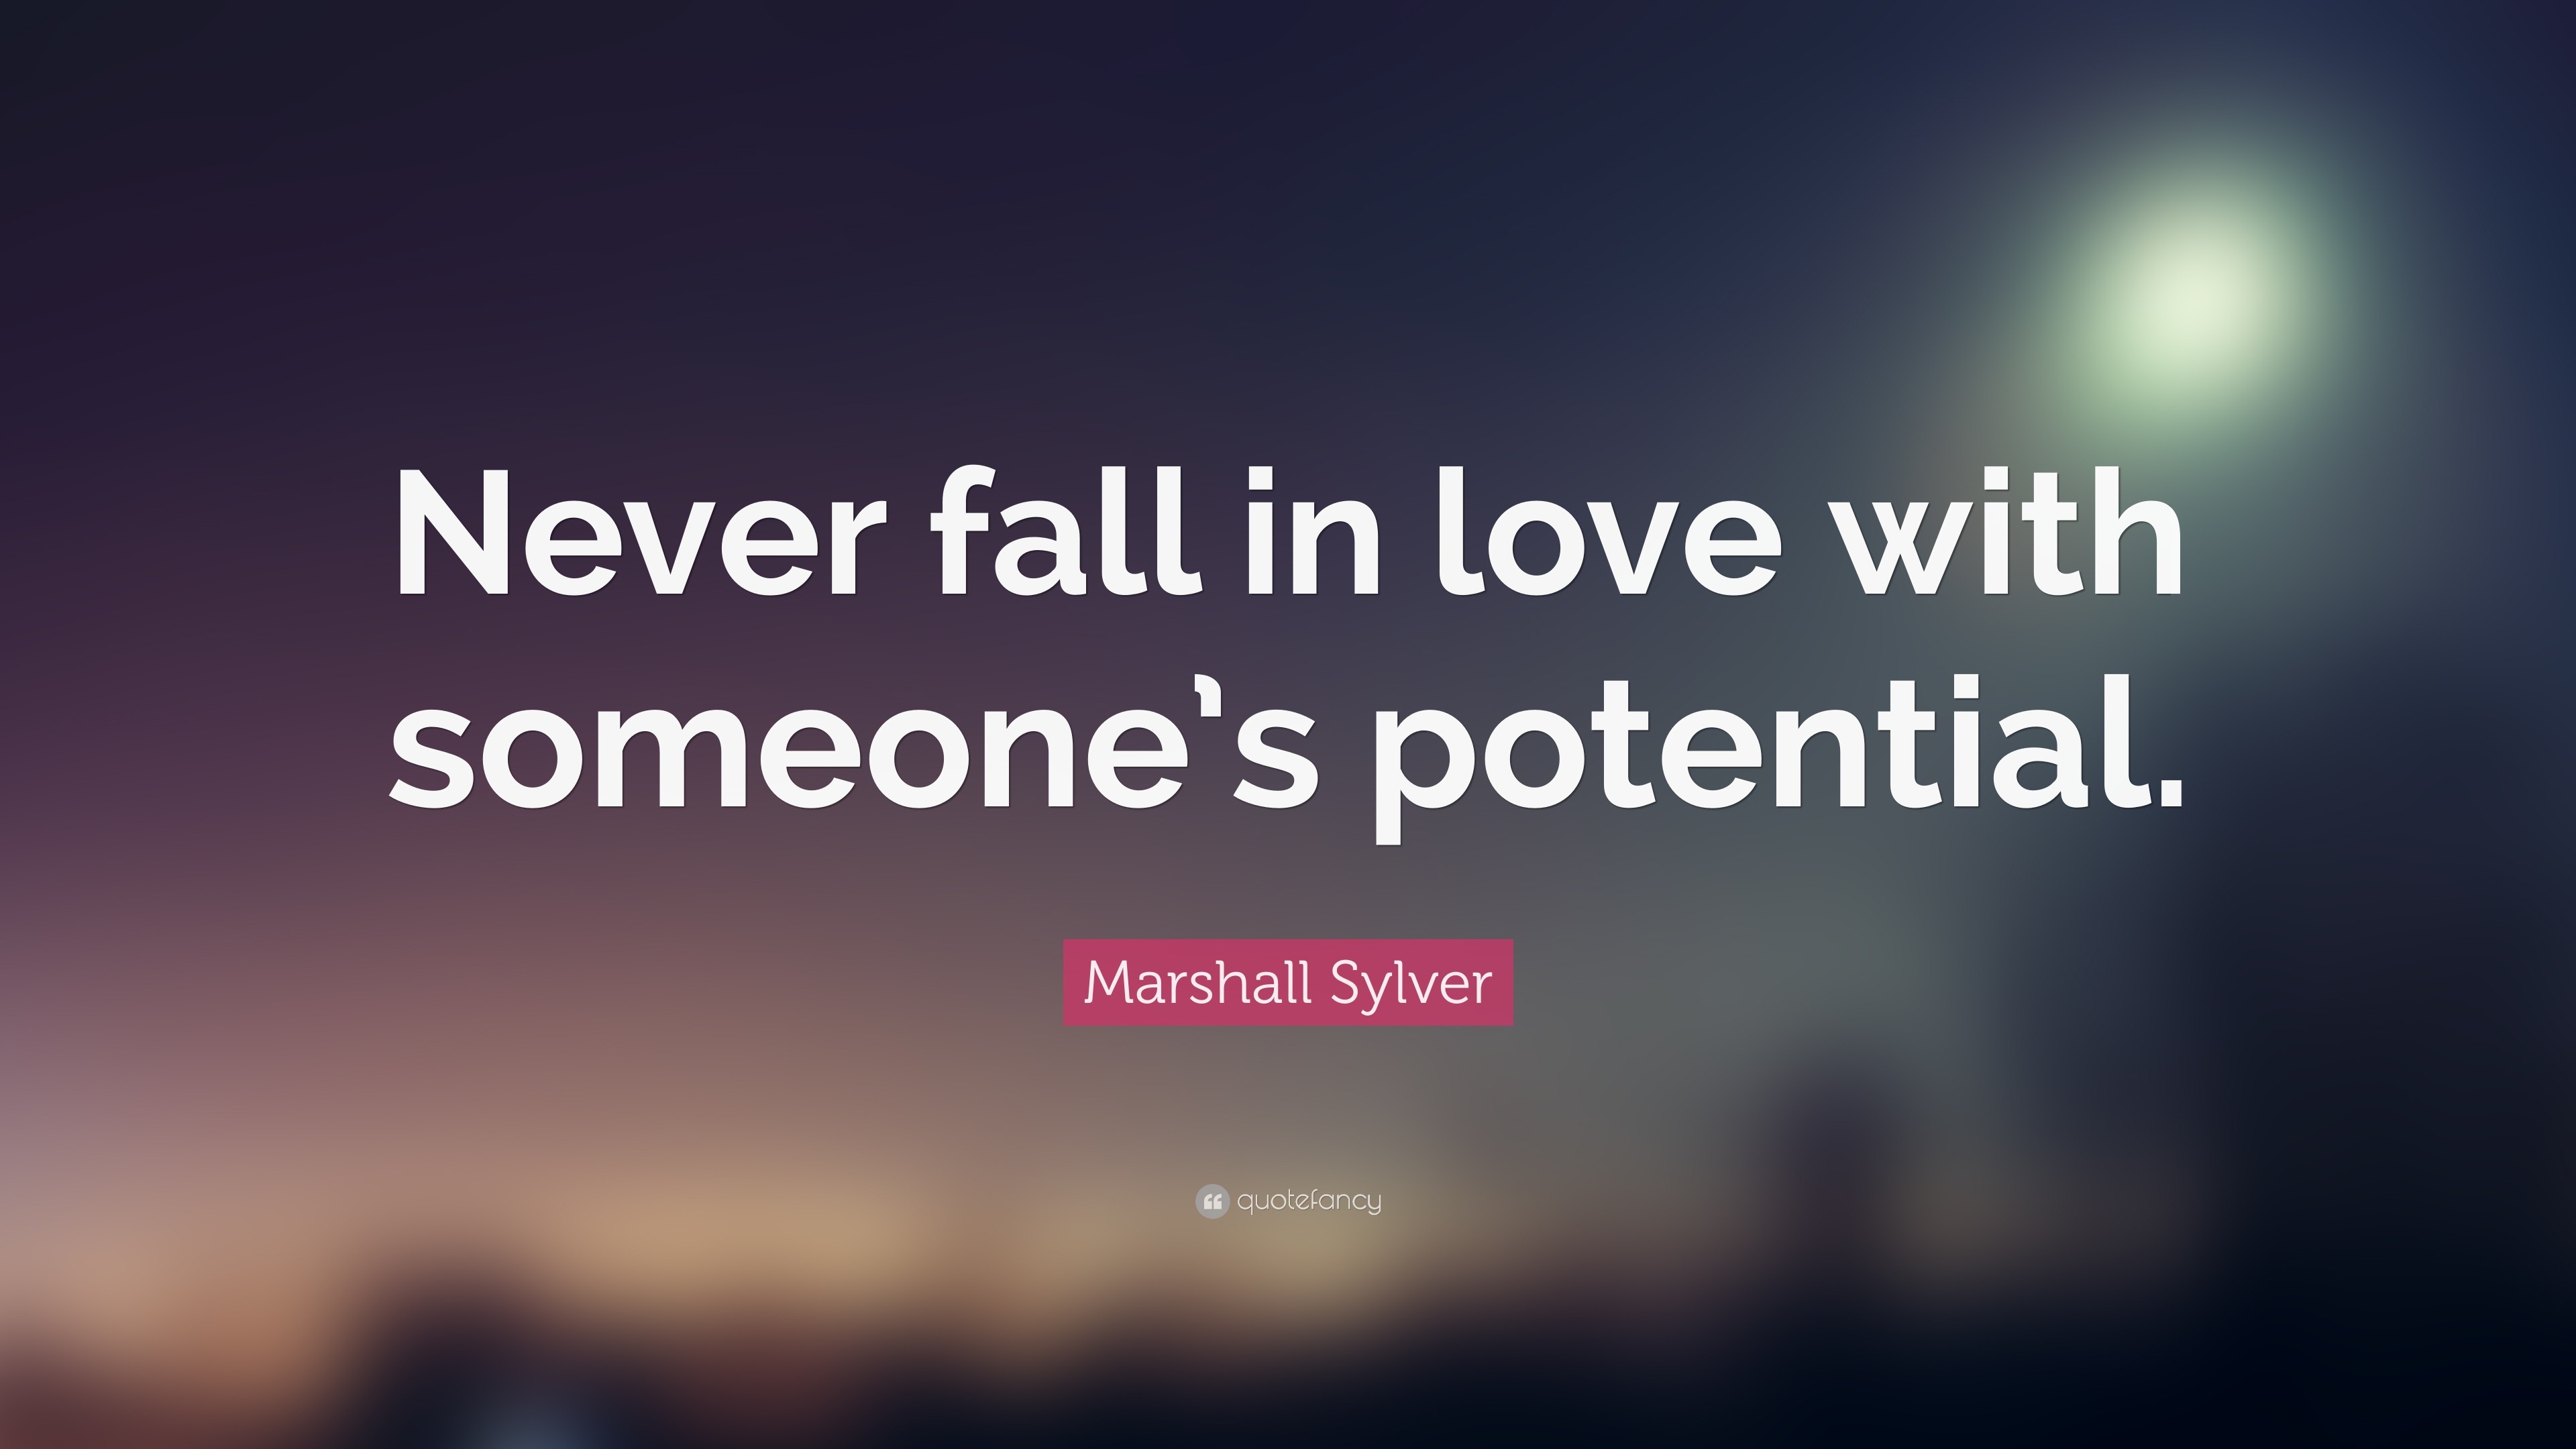 Marshall Sylver Quote “Never fall in love with someone s potential ”